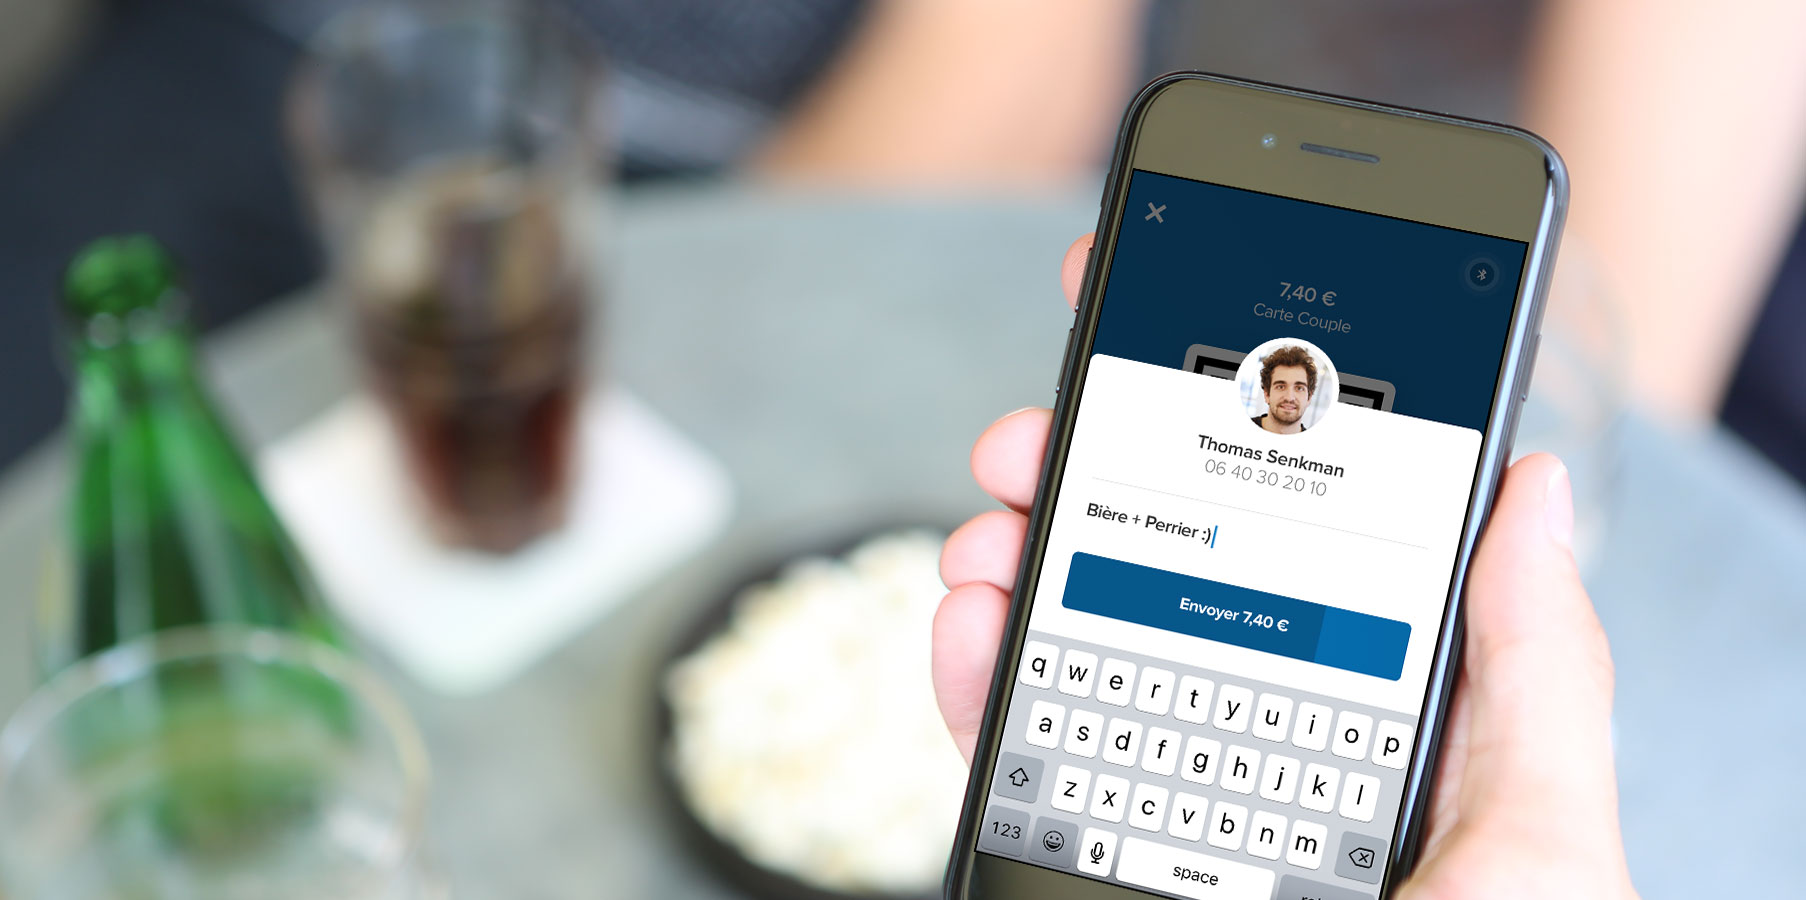 Lydia raises $16.1 million to become the PayPal of mobile payments